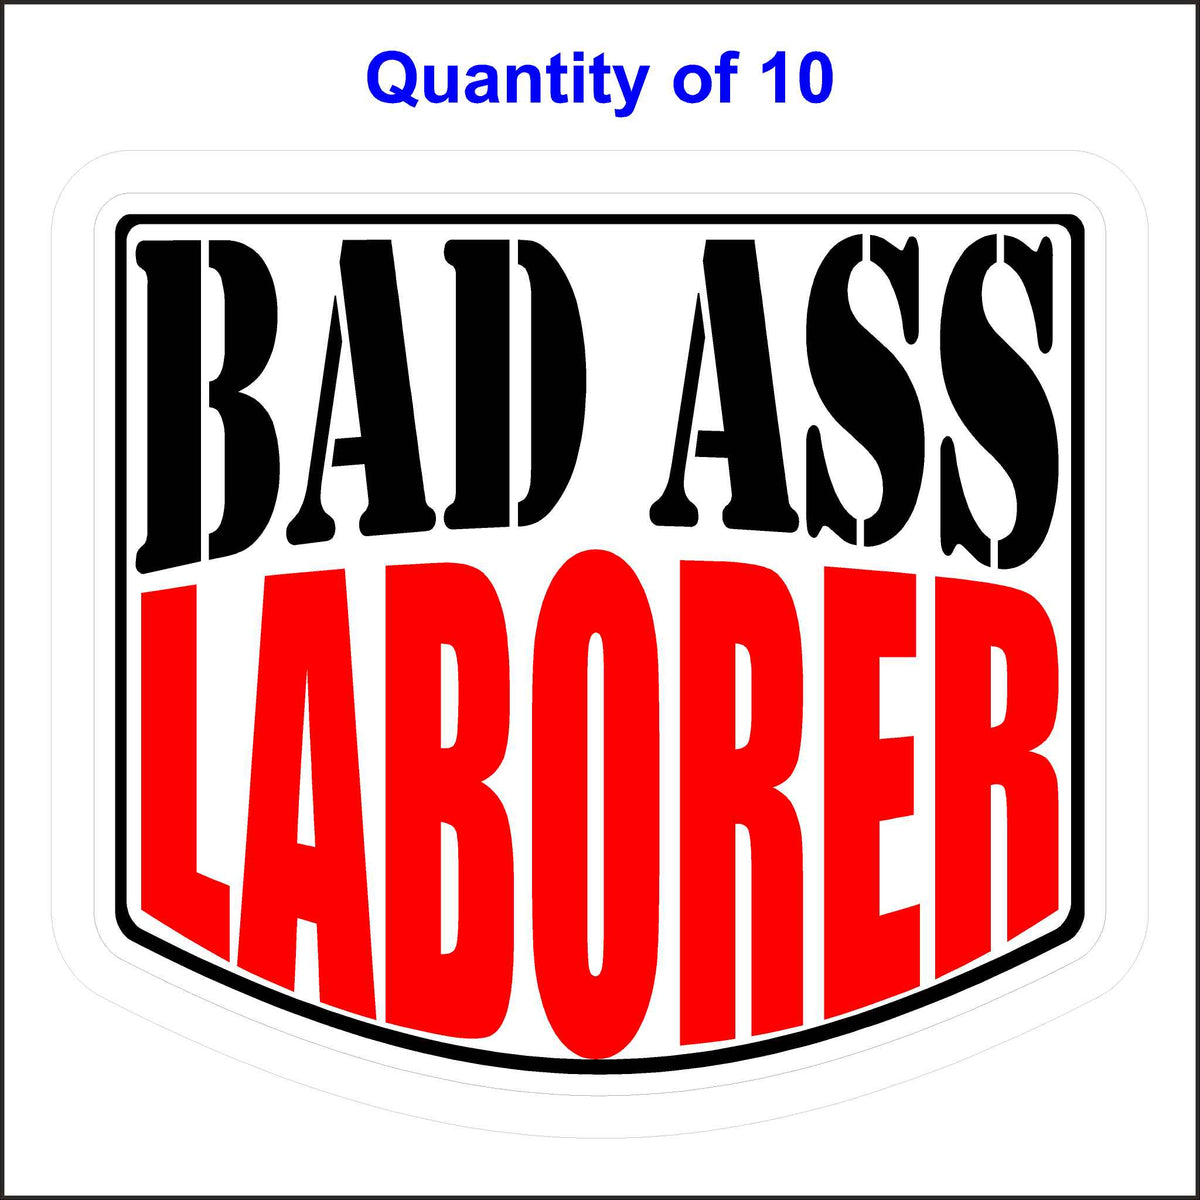 Bad Ass Laborer Stickers 10 Quantity.